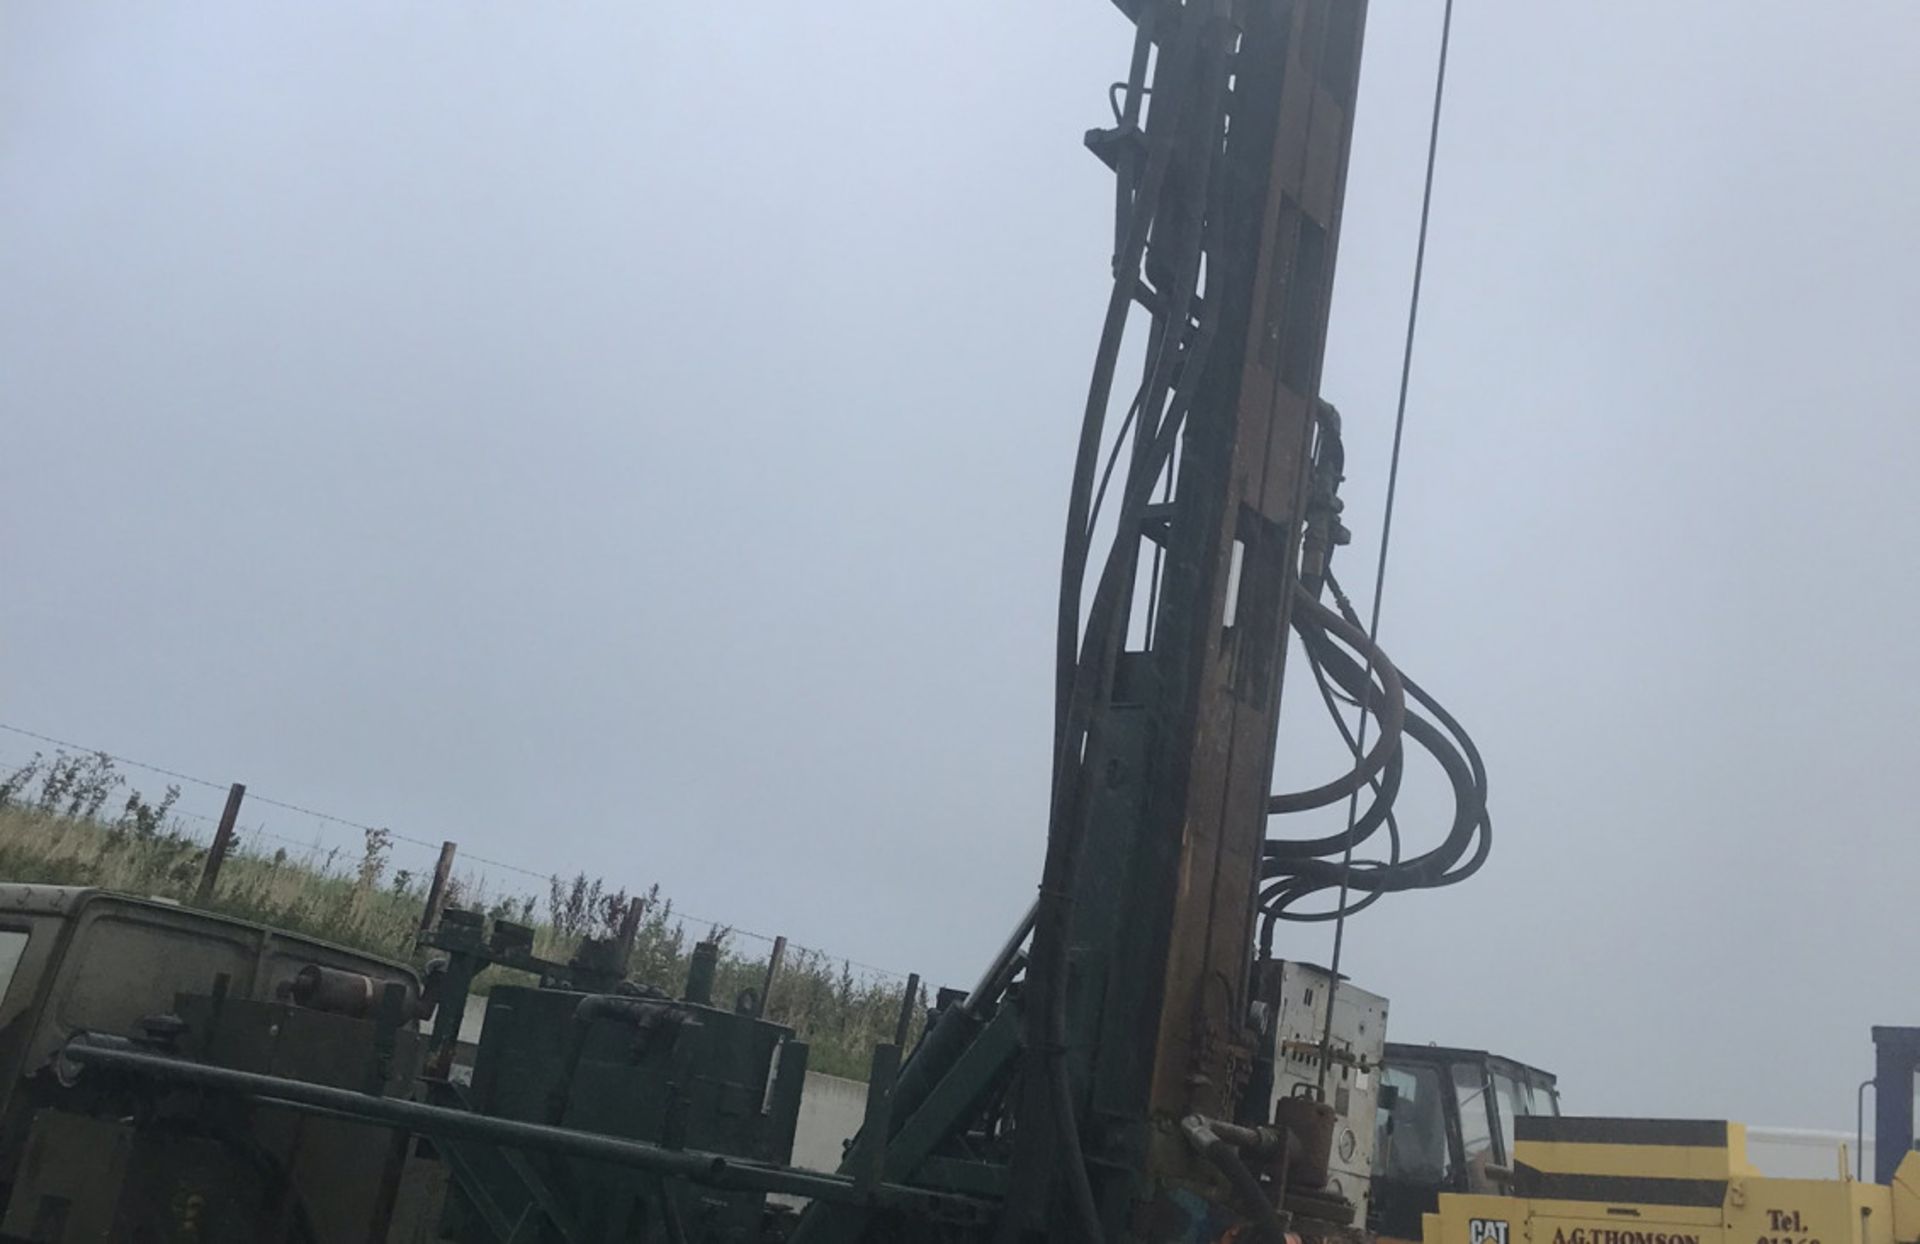 DAF 4×4 DANDO WATER WELL DRILL RIG - Image 7 of 10